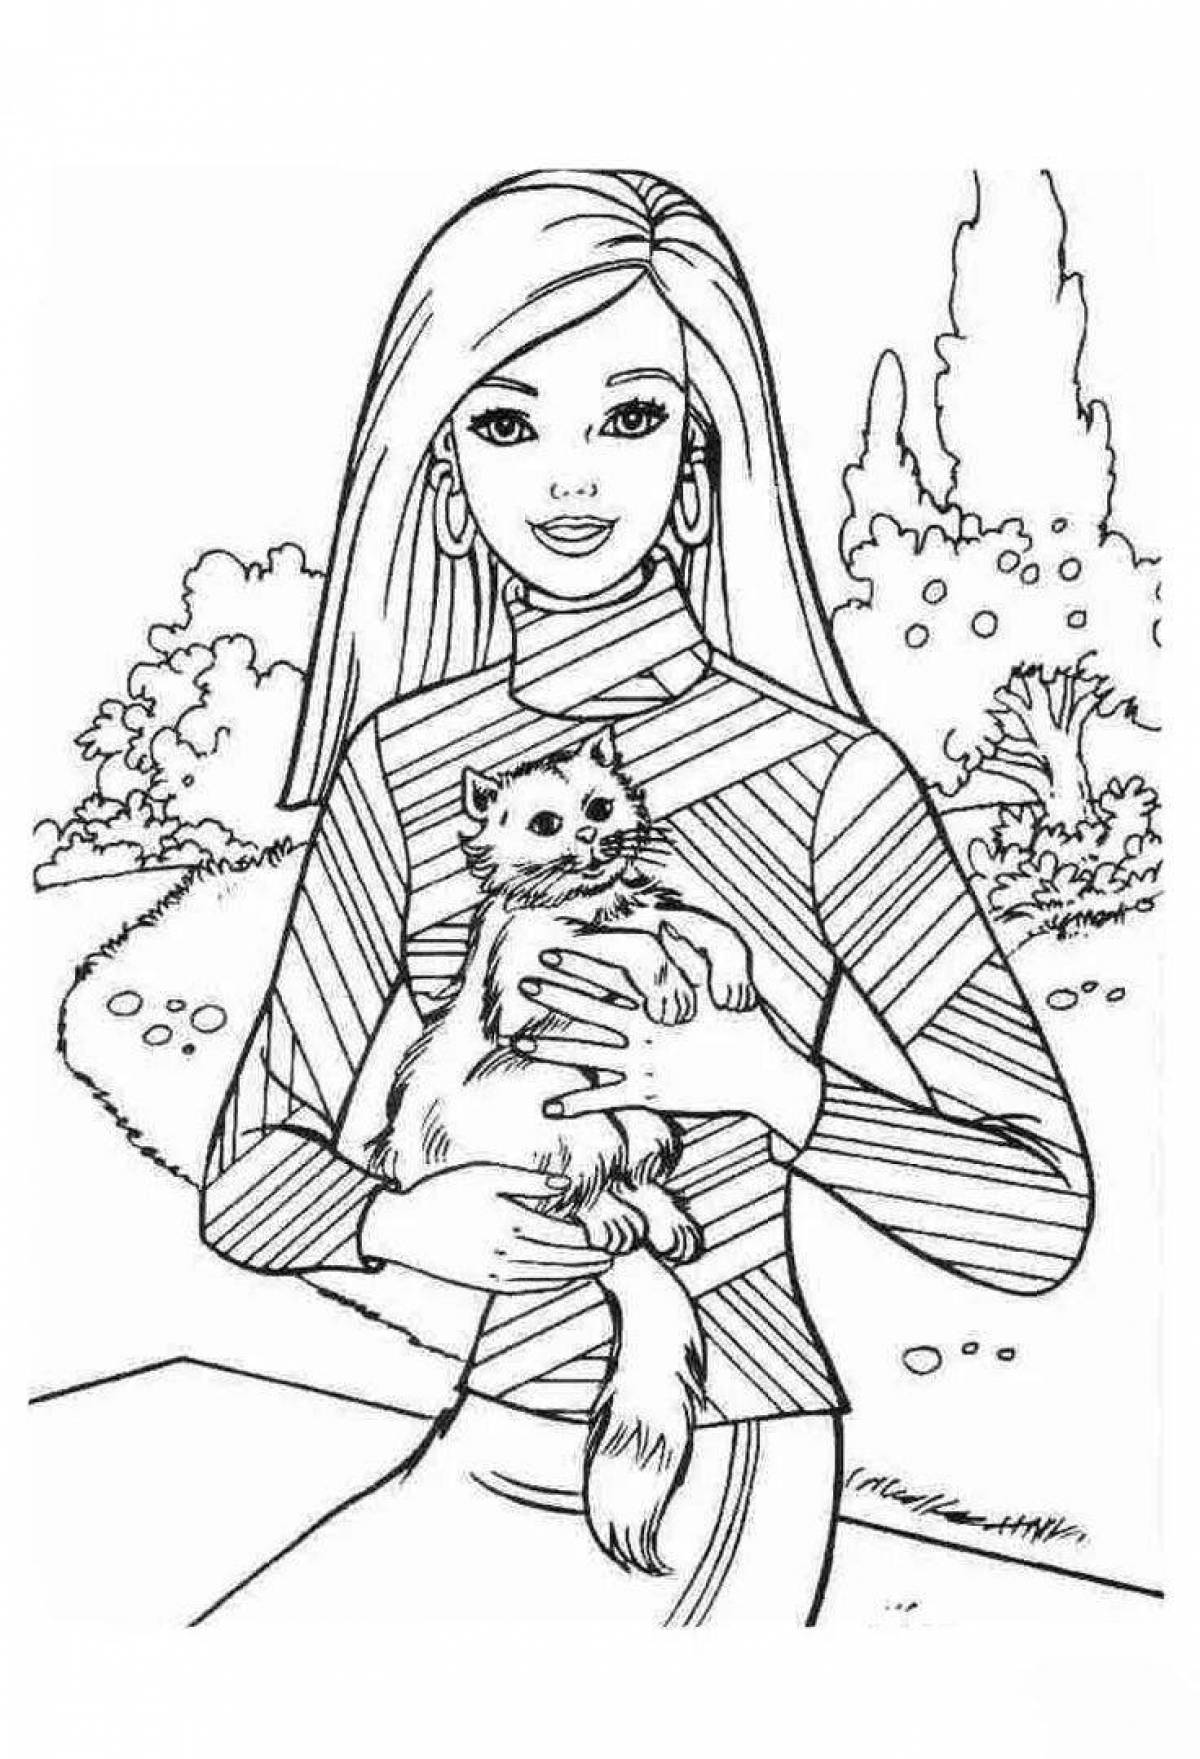 Delightful coloring barbie with a kitten